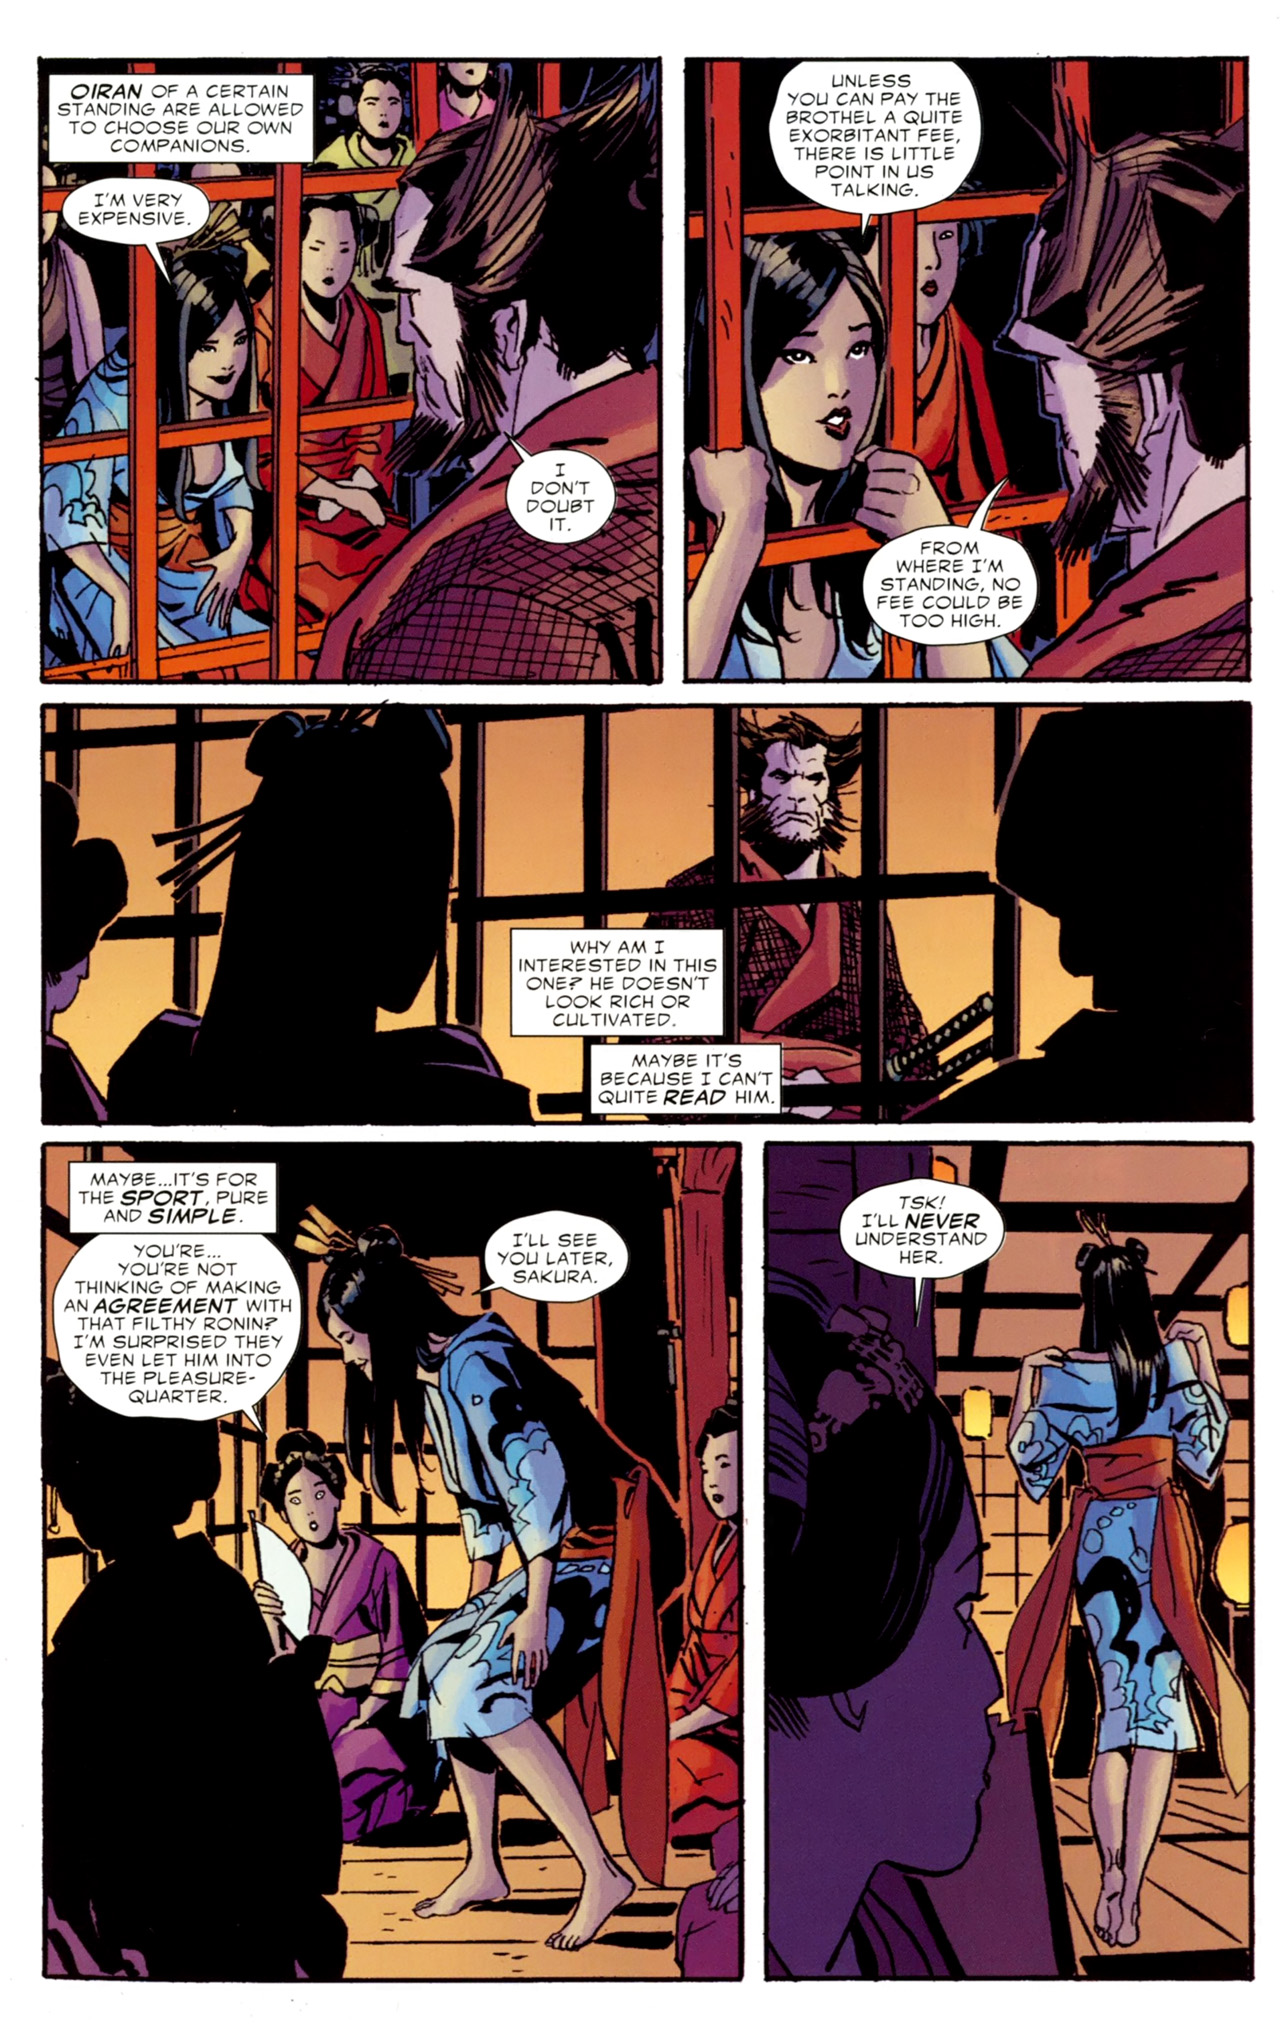 5 Ronin #4 - Chapter Four: The Way Of The Butterfly - Psylocke